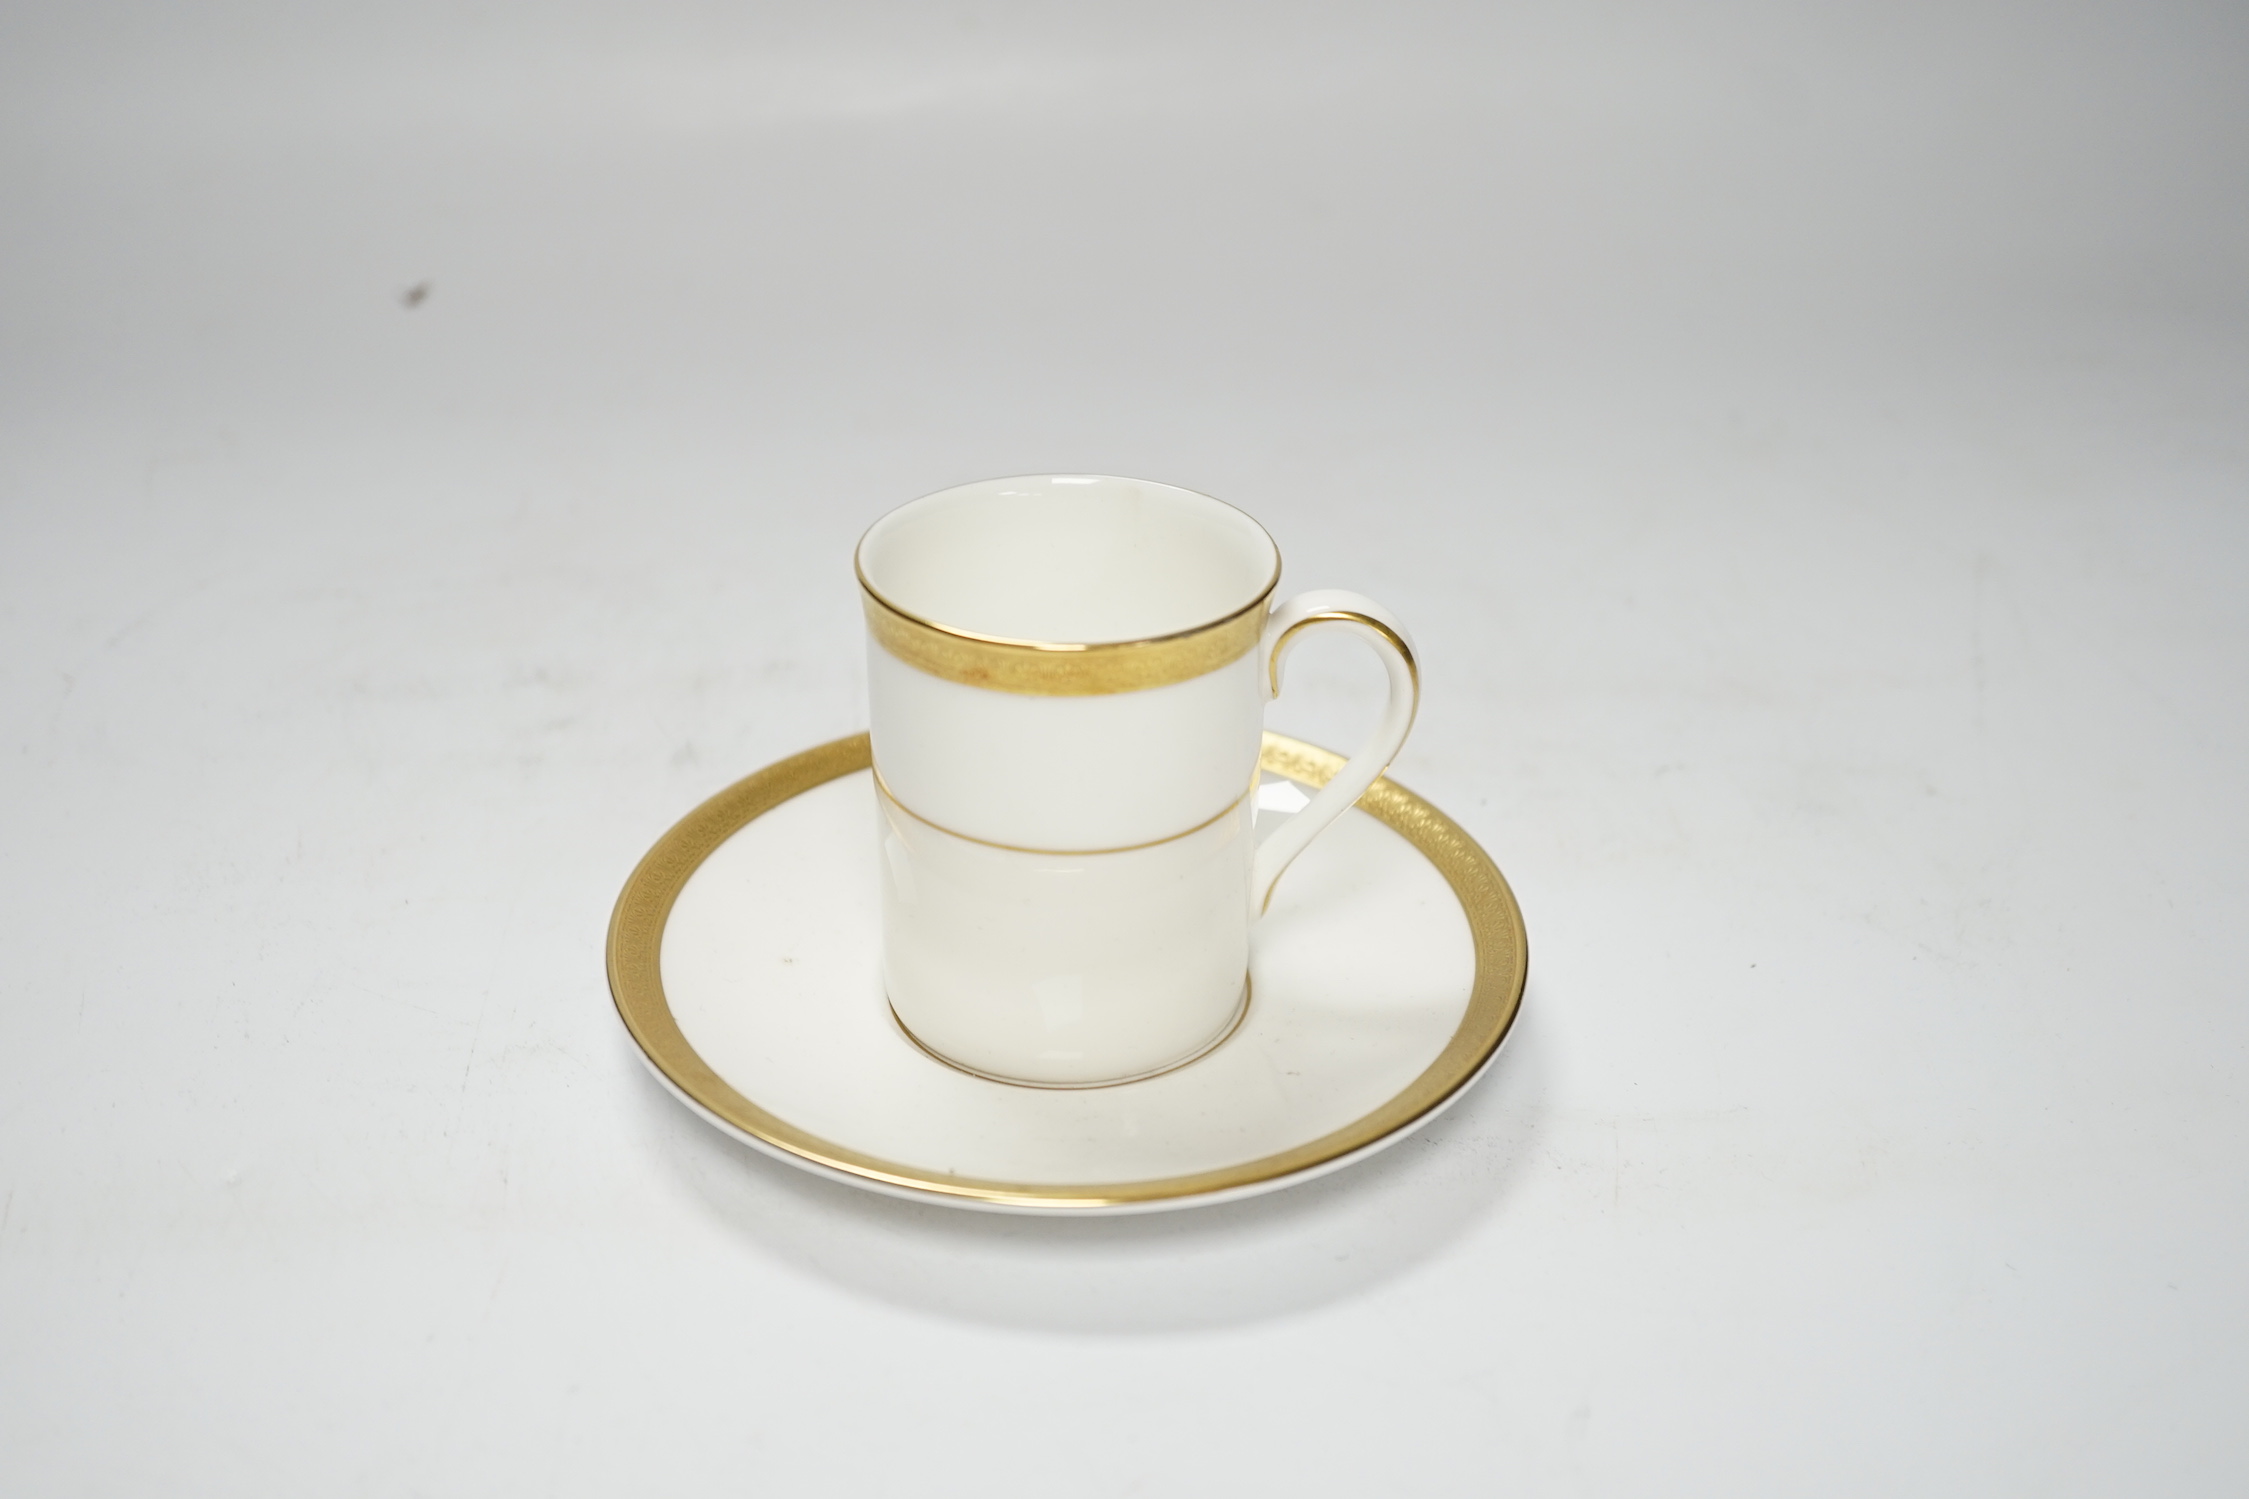 A cased Royal Doulton Royal gold pattern set of coffee cans and saucers